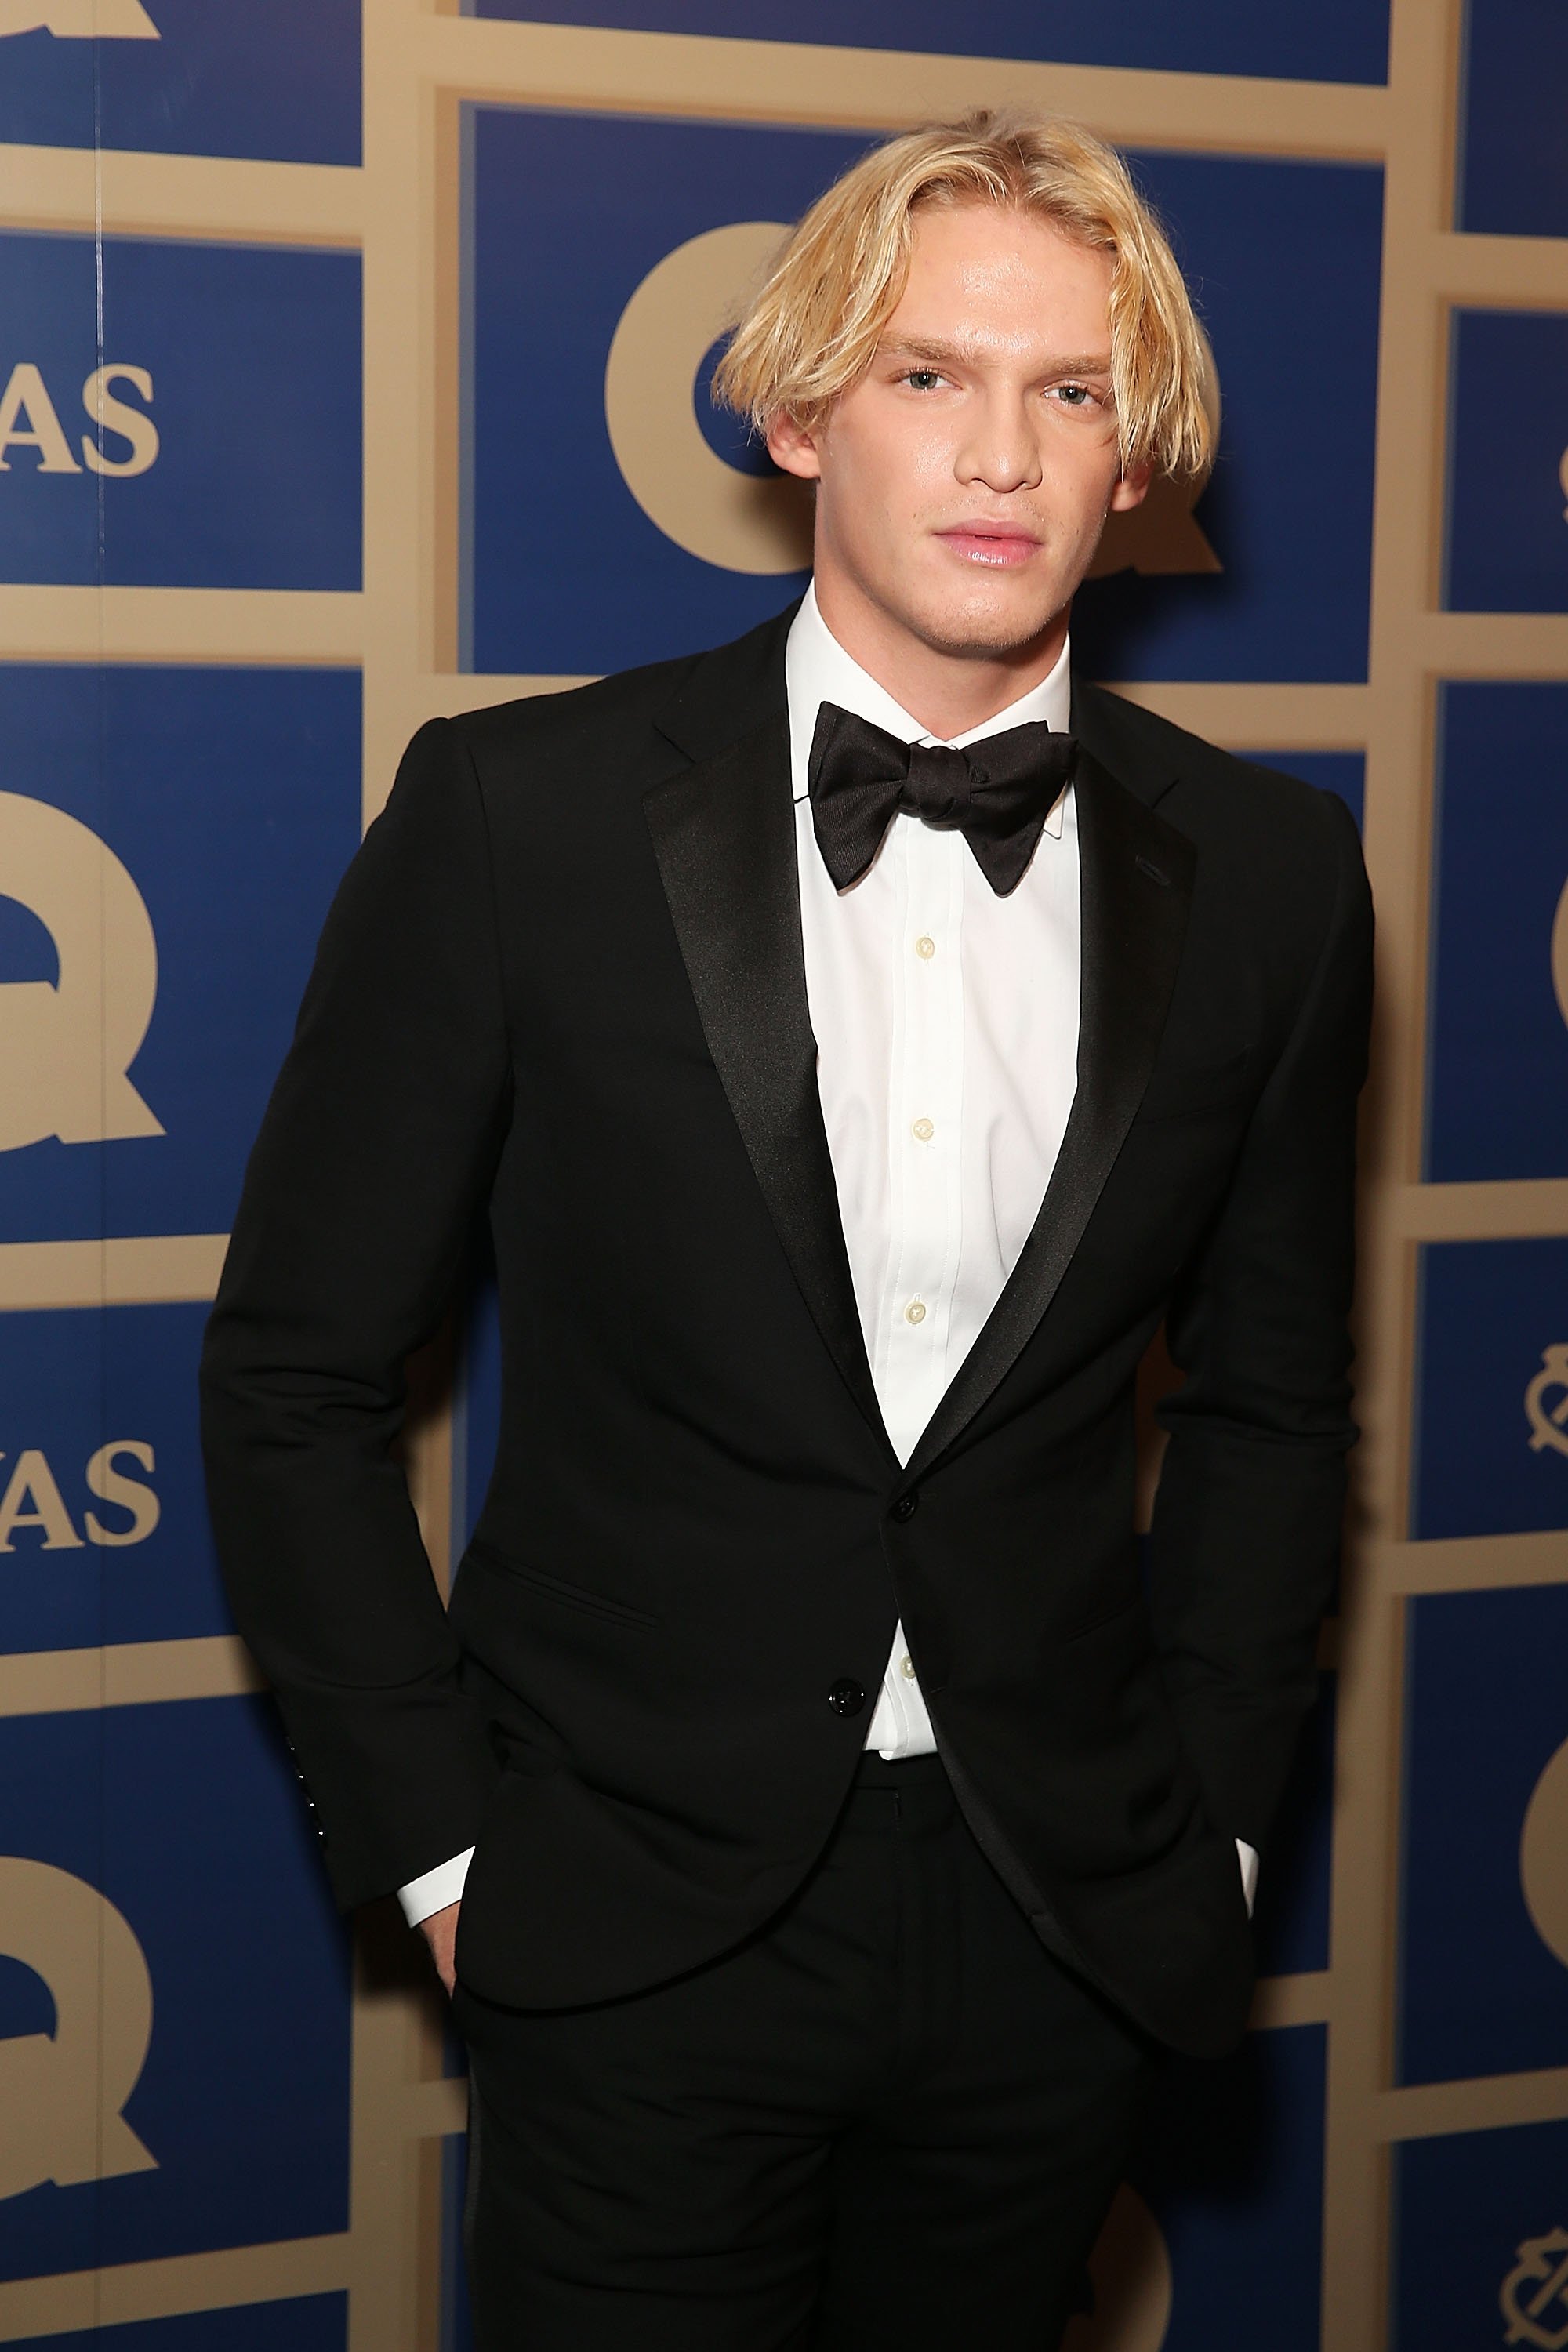 Cody Simpson pictured at 2015 GQ Men Of The Year Awards in Sydney, Australia on November 10, 2015. | Photo: Getty Images